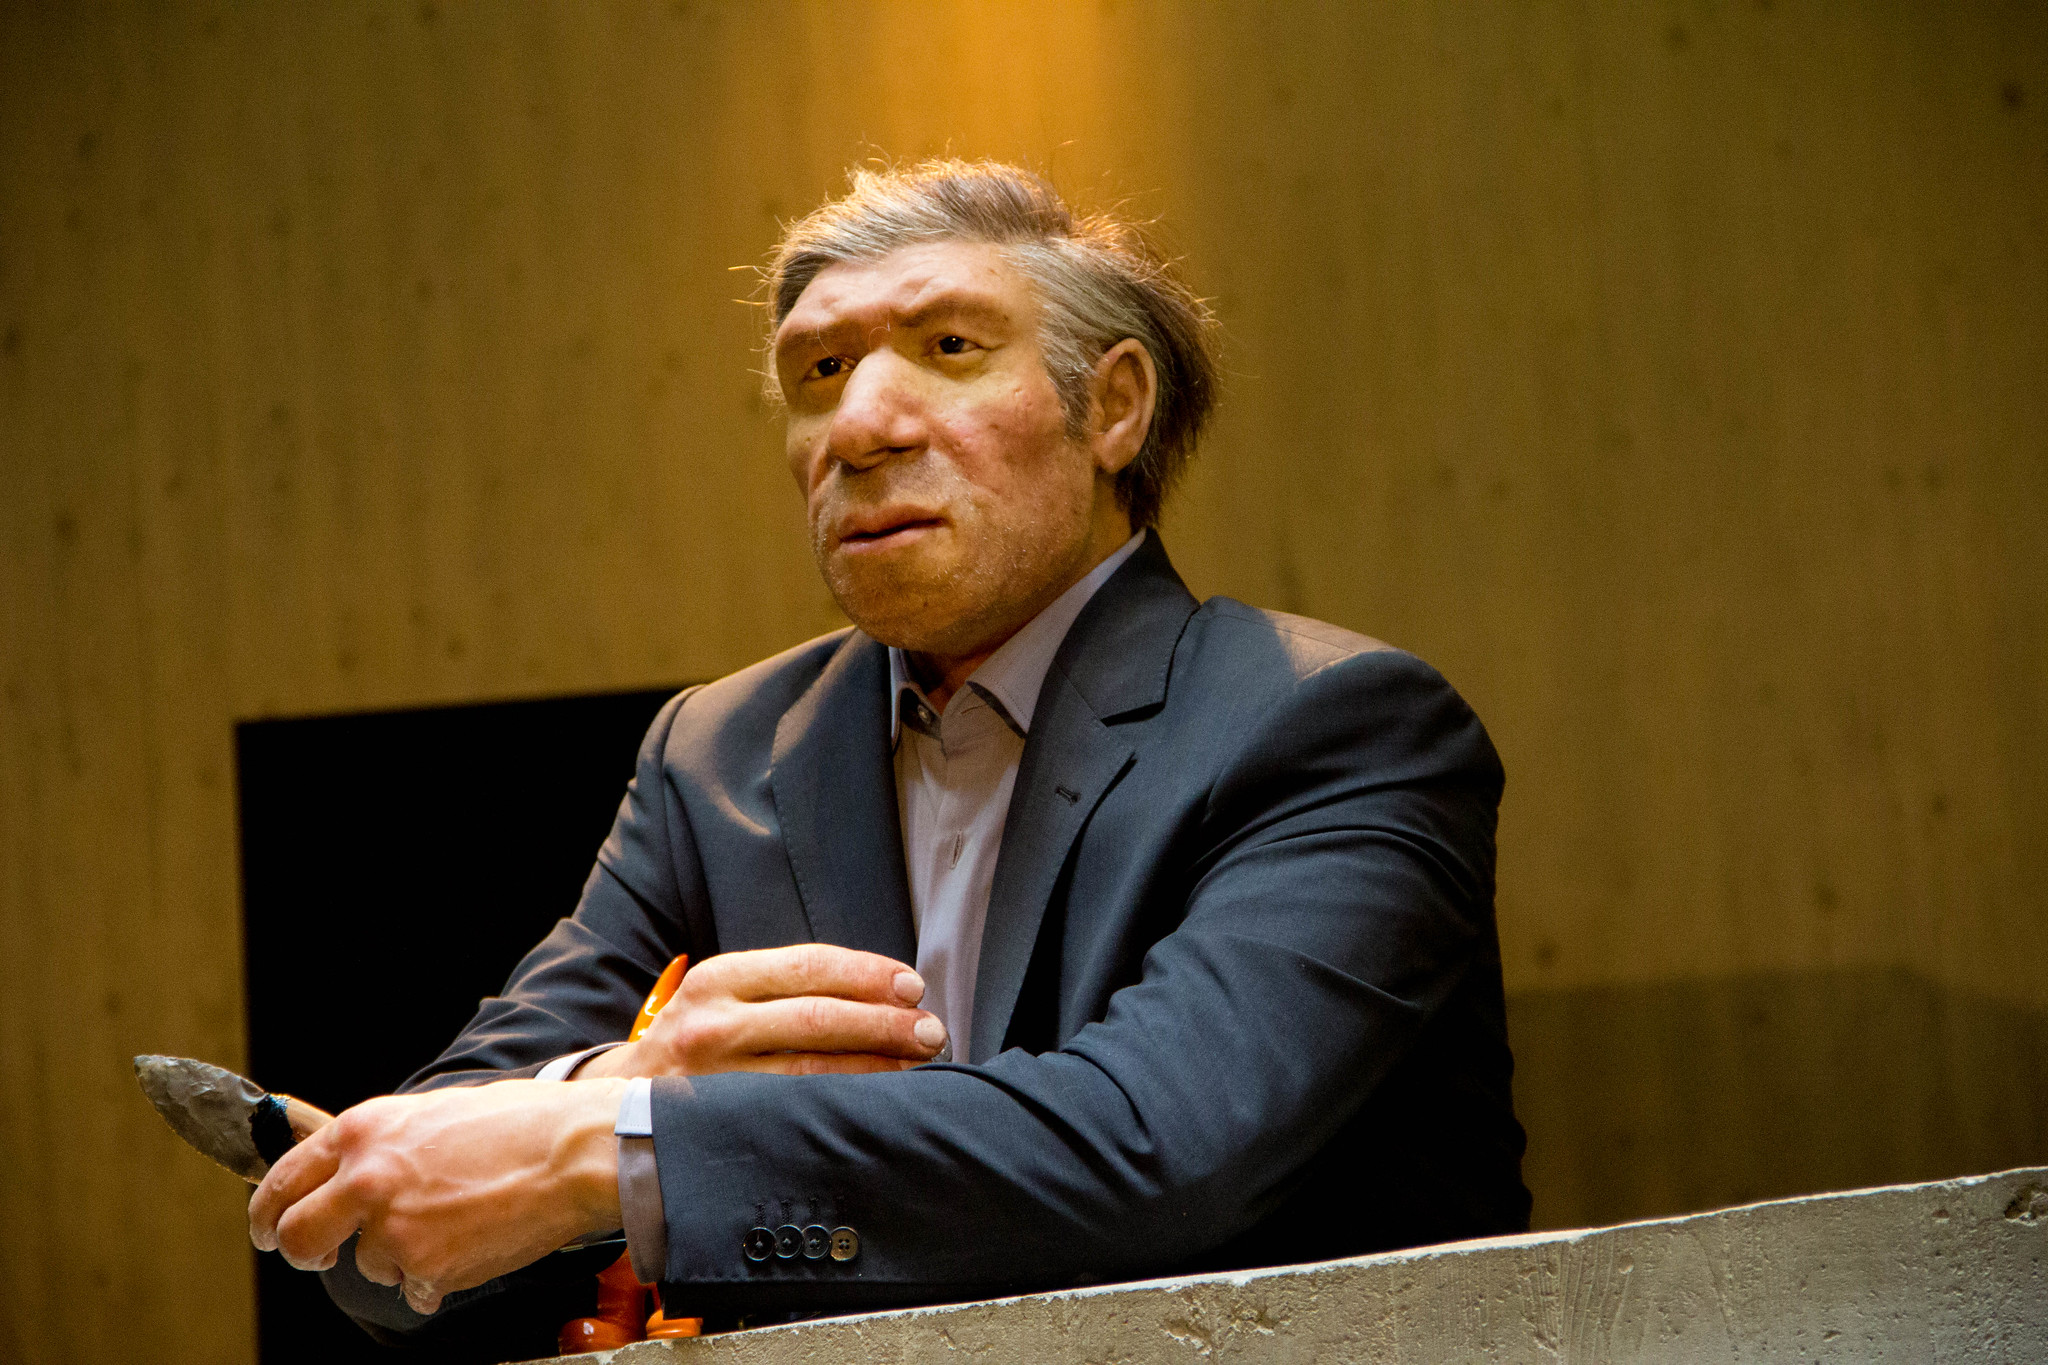 Europeans Have Less Neanderthal DNA